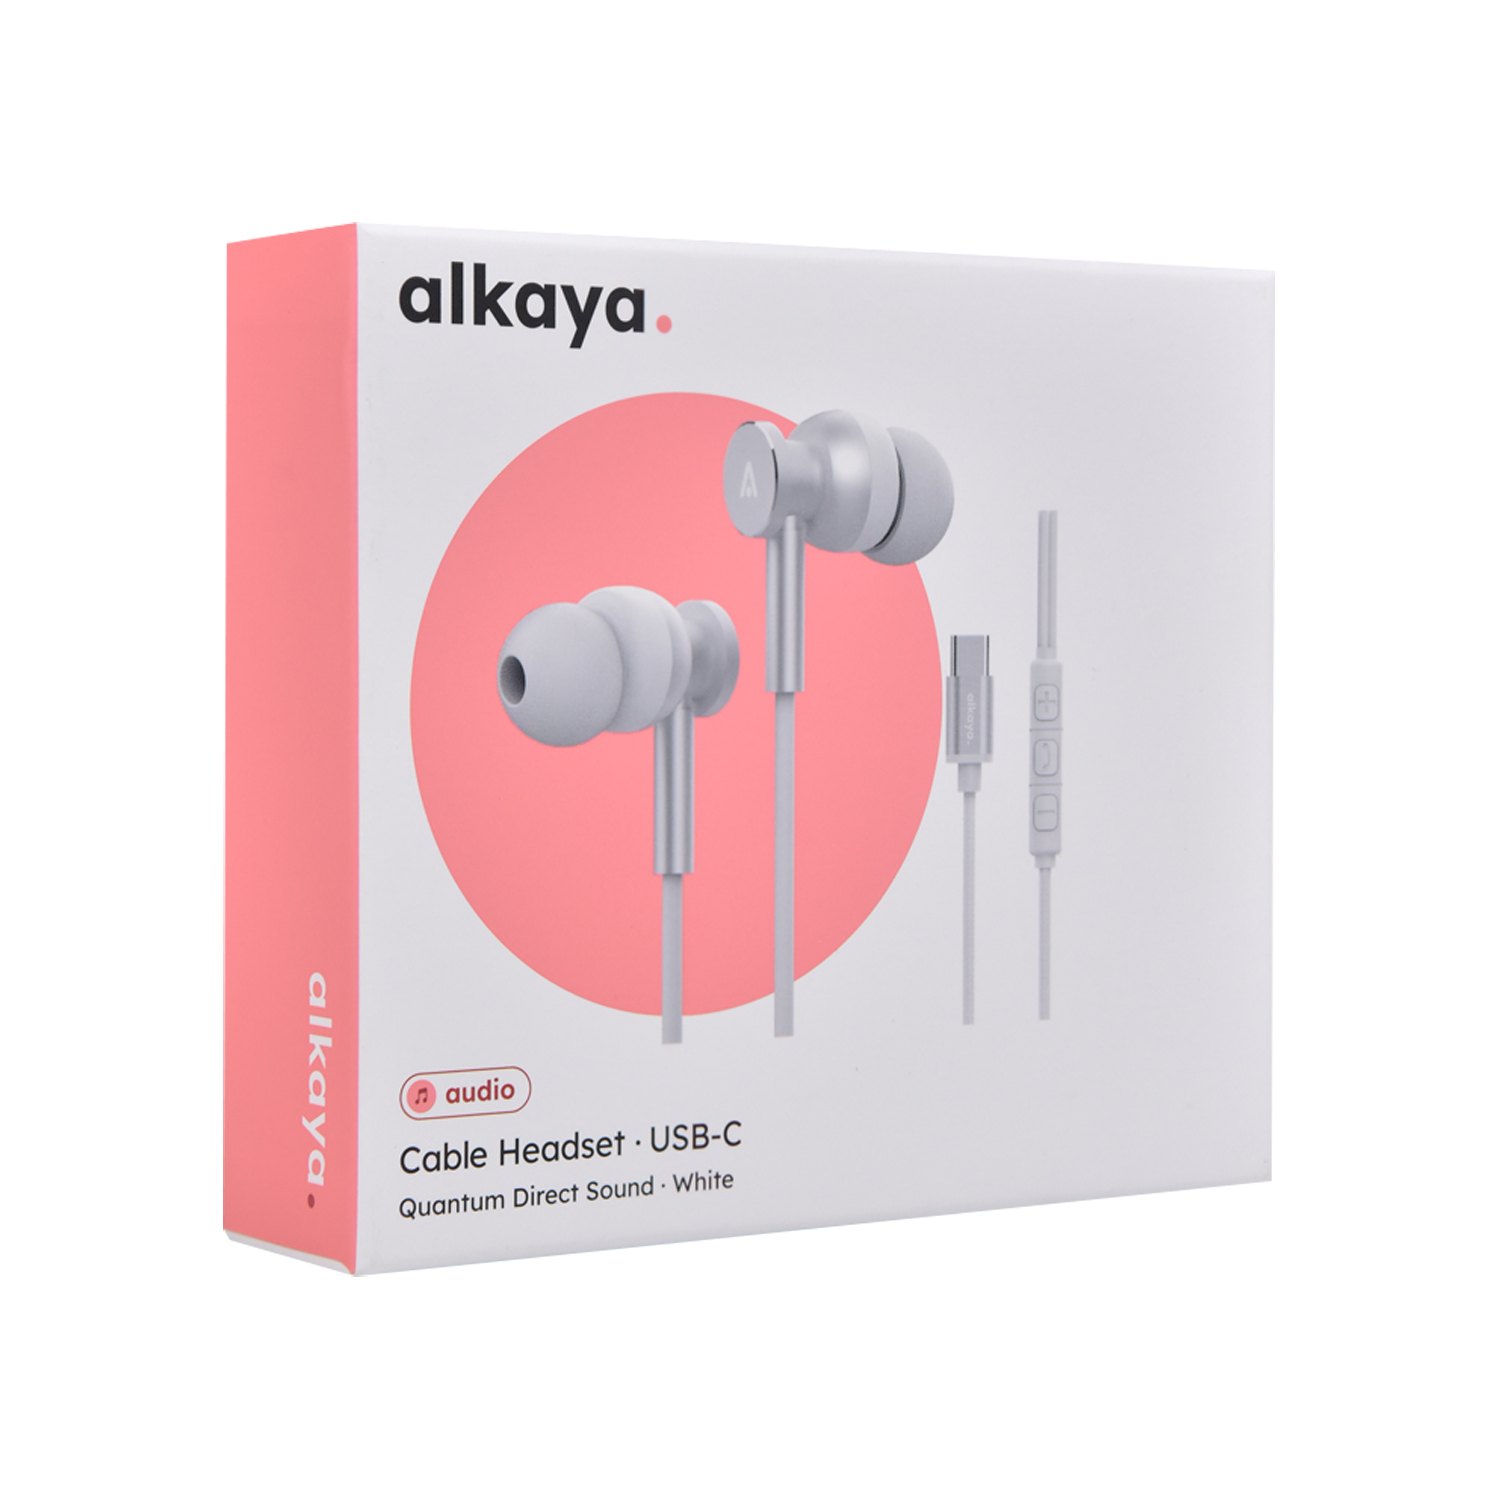 alkaya. | Quantum Direct Sound Cable Headset Volume Control |  USB-C connector, White